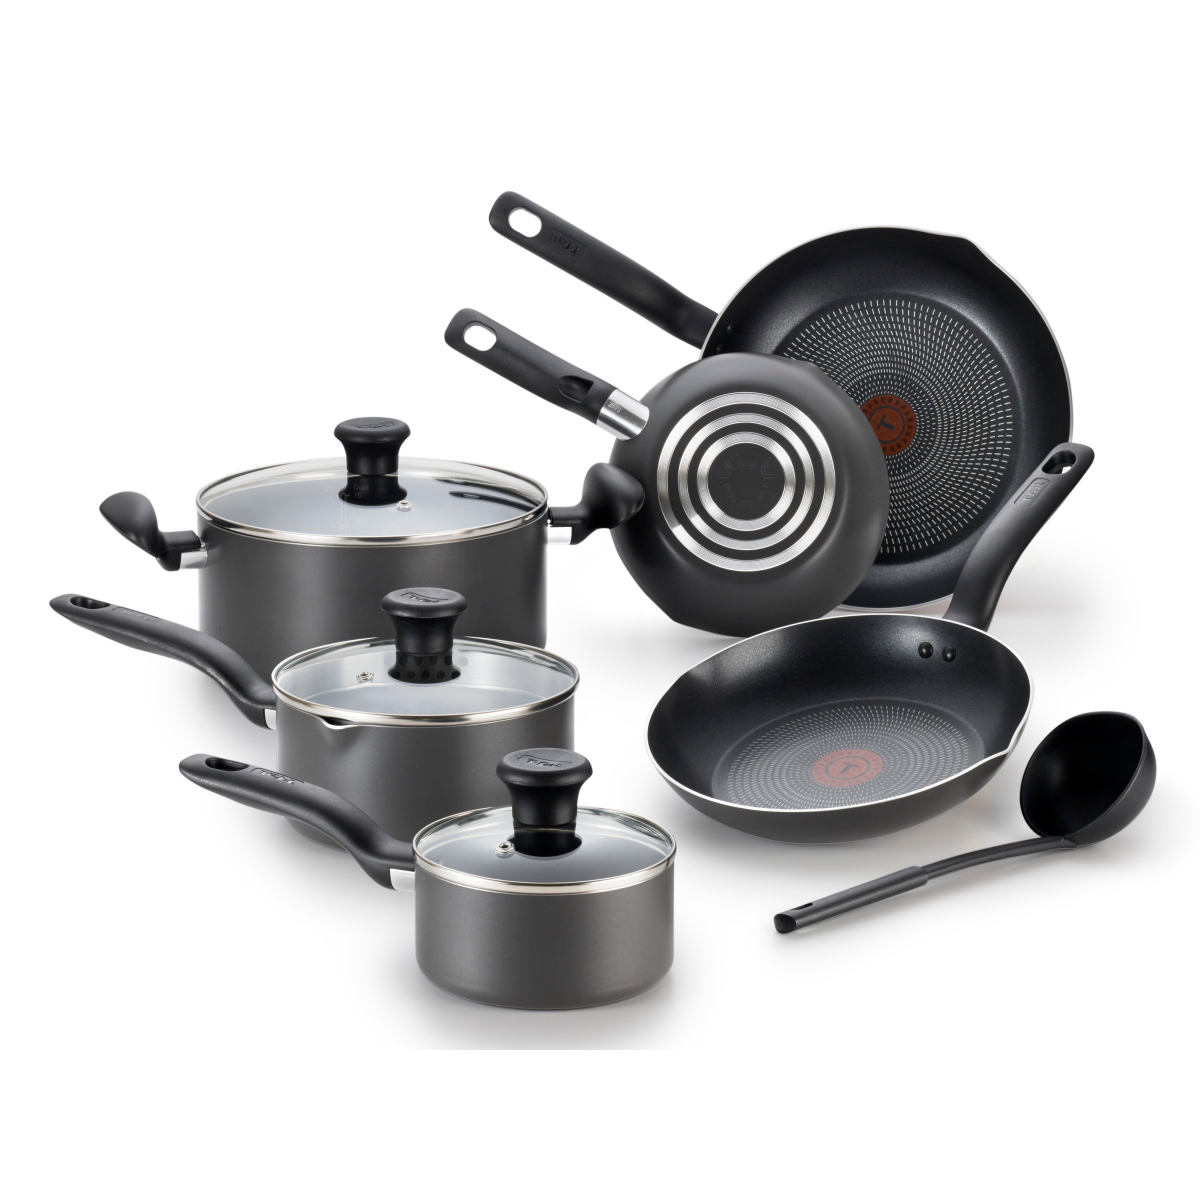 slide 1 of 29, T-fal Initiatives Nonstick Inside and Out Cookware Set - Charcoal, 10 pc